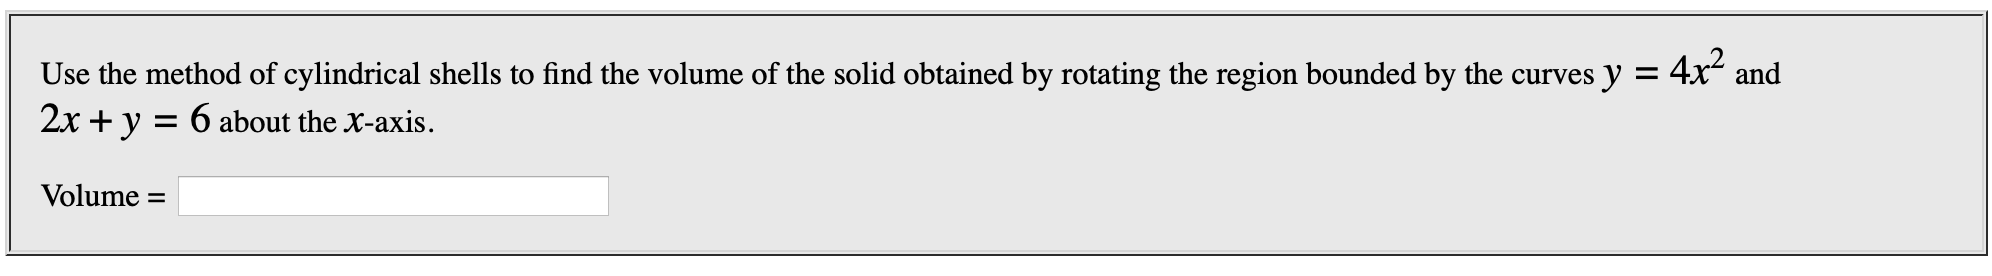 Use the method of cylindrical shells to find the volume of the solid obtained by rotating the region bounded by the curves y = 4x2:
2x y = 6 about the X-axis.
and
Volume
